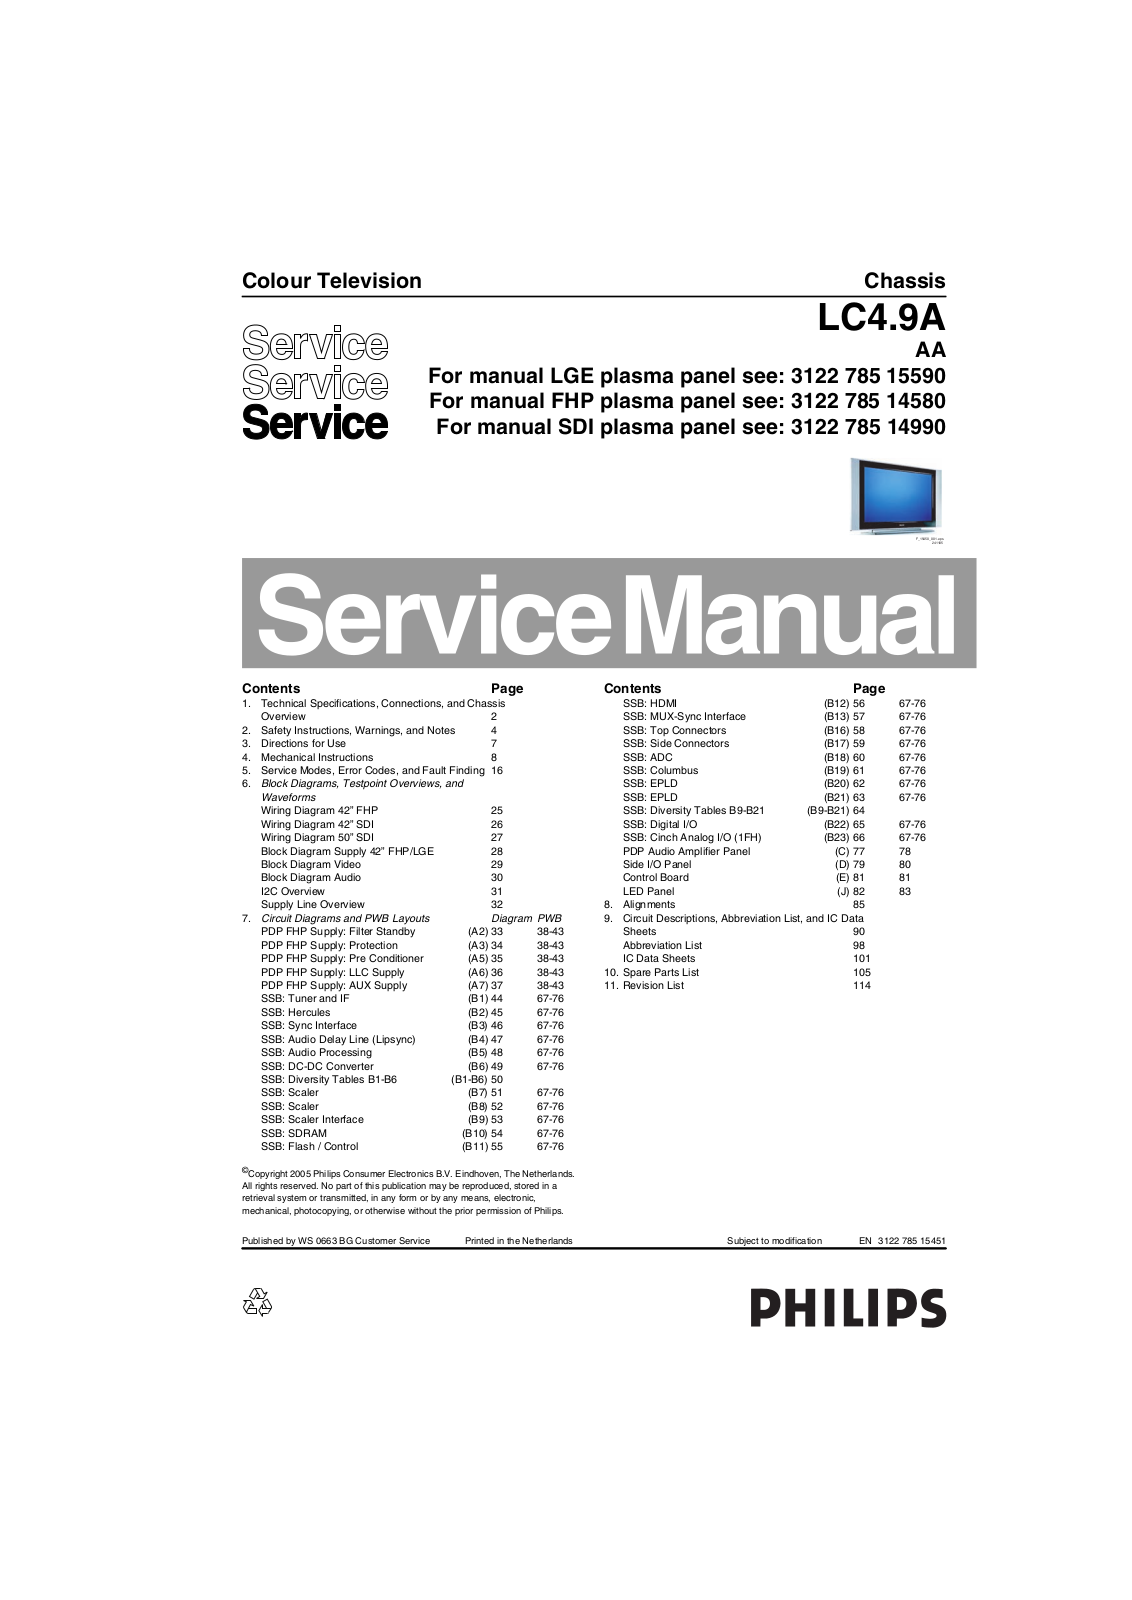 Philips LC4.9A-AA Service Manual